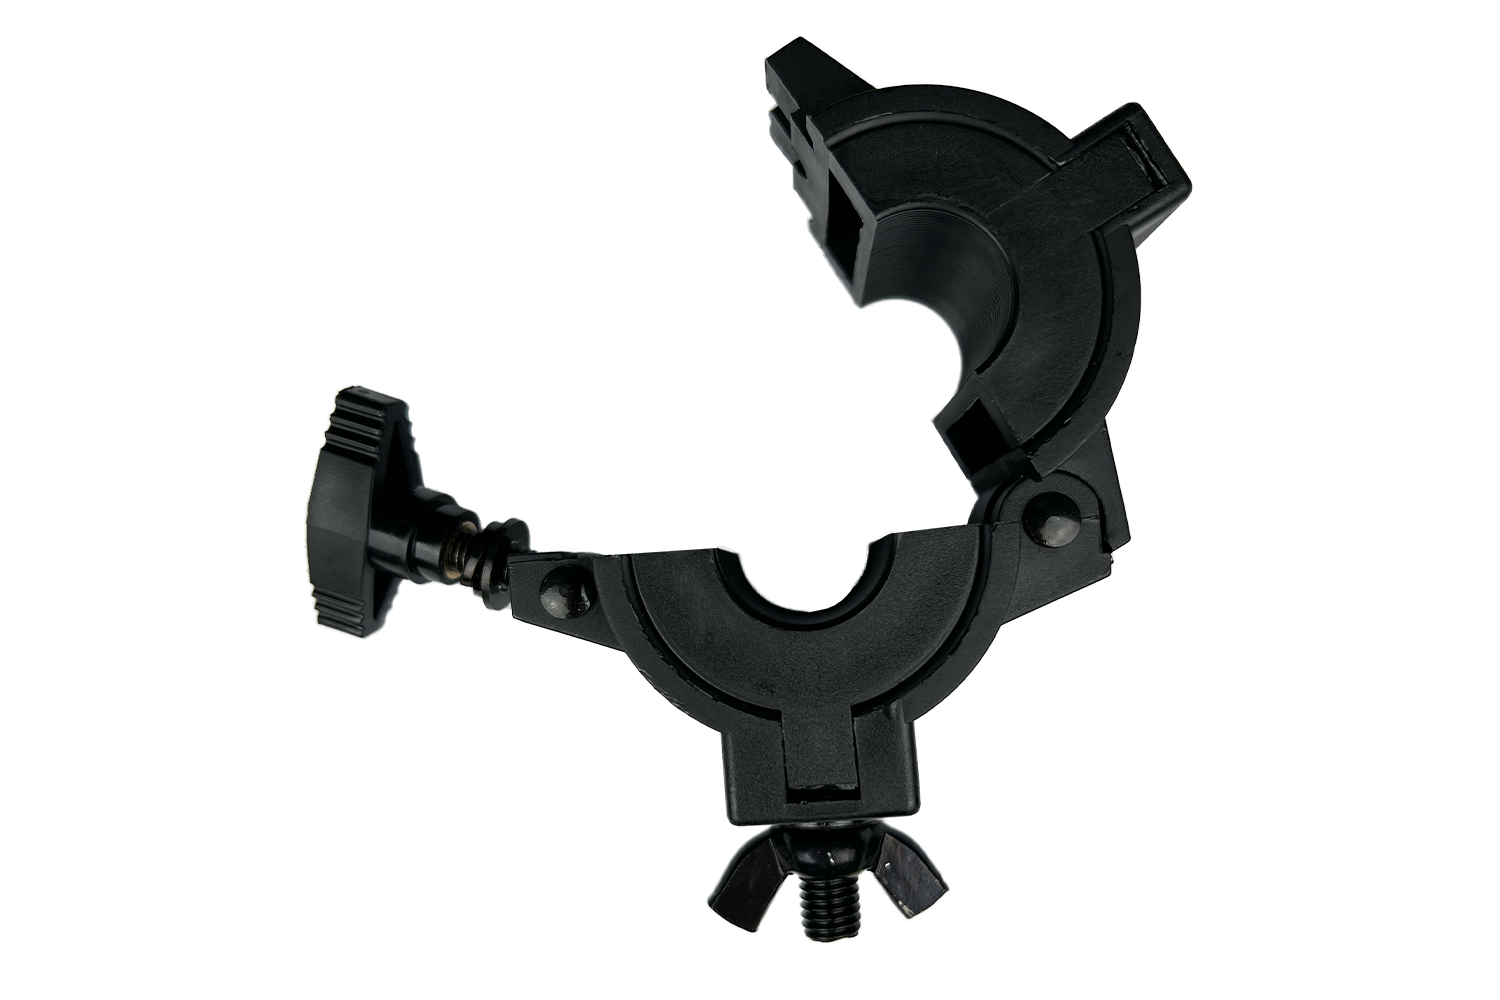 CLAMPE38 - Variable Diameter Clamp (Suits 25, 38 or 50mm) - Black